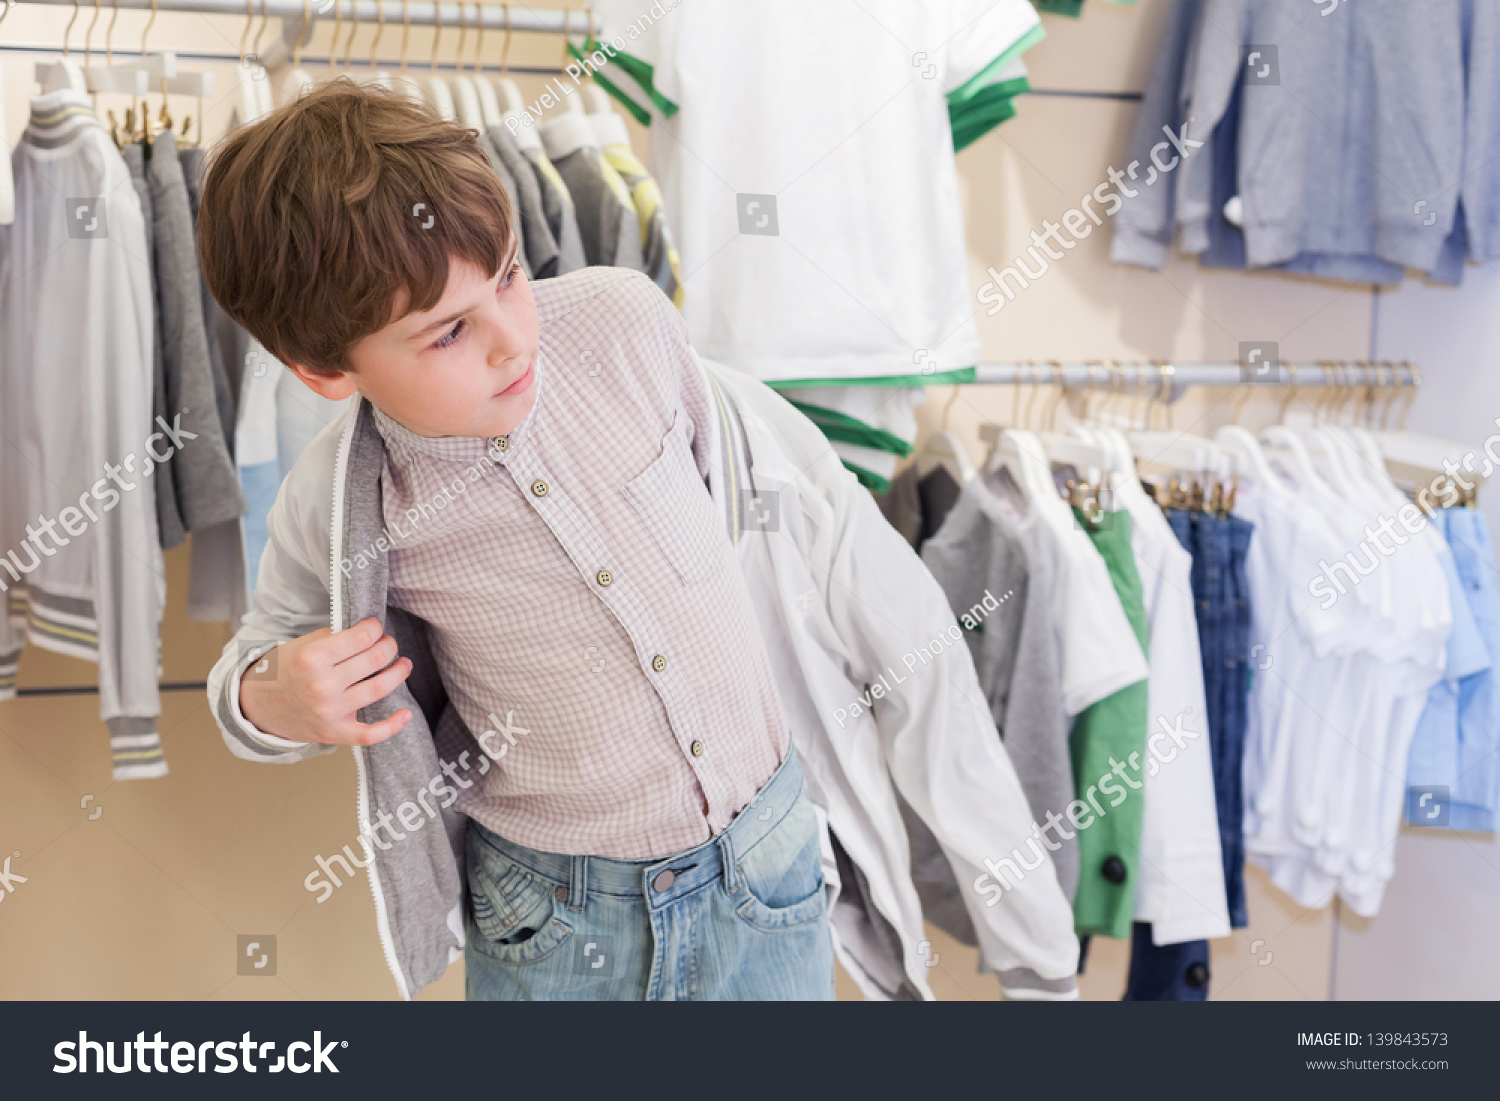 Boy Tries On Clothes Childrens Clothing Stock Photo 139843573 ...